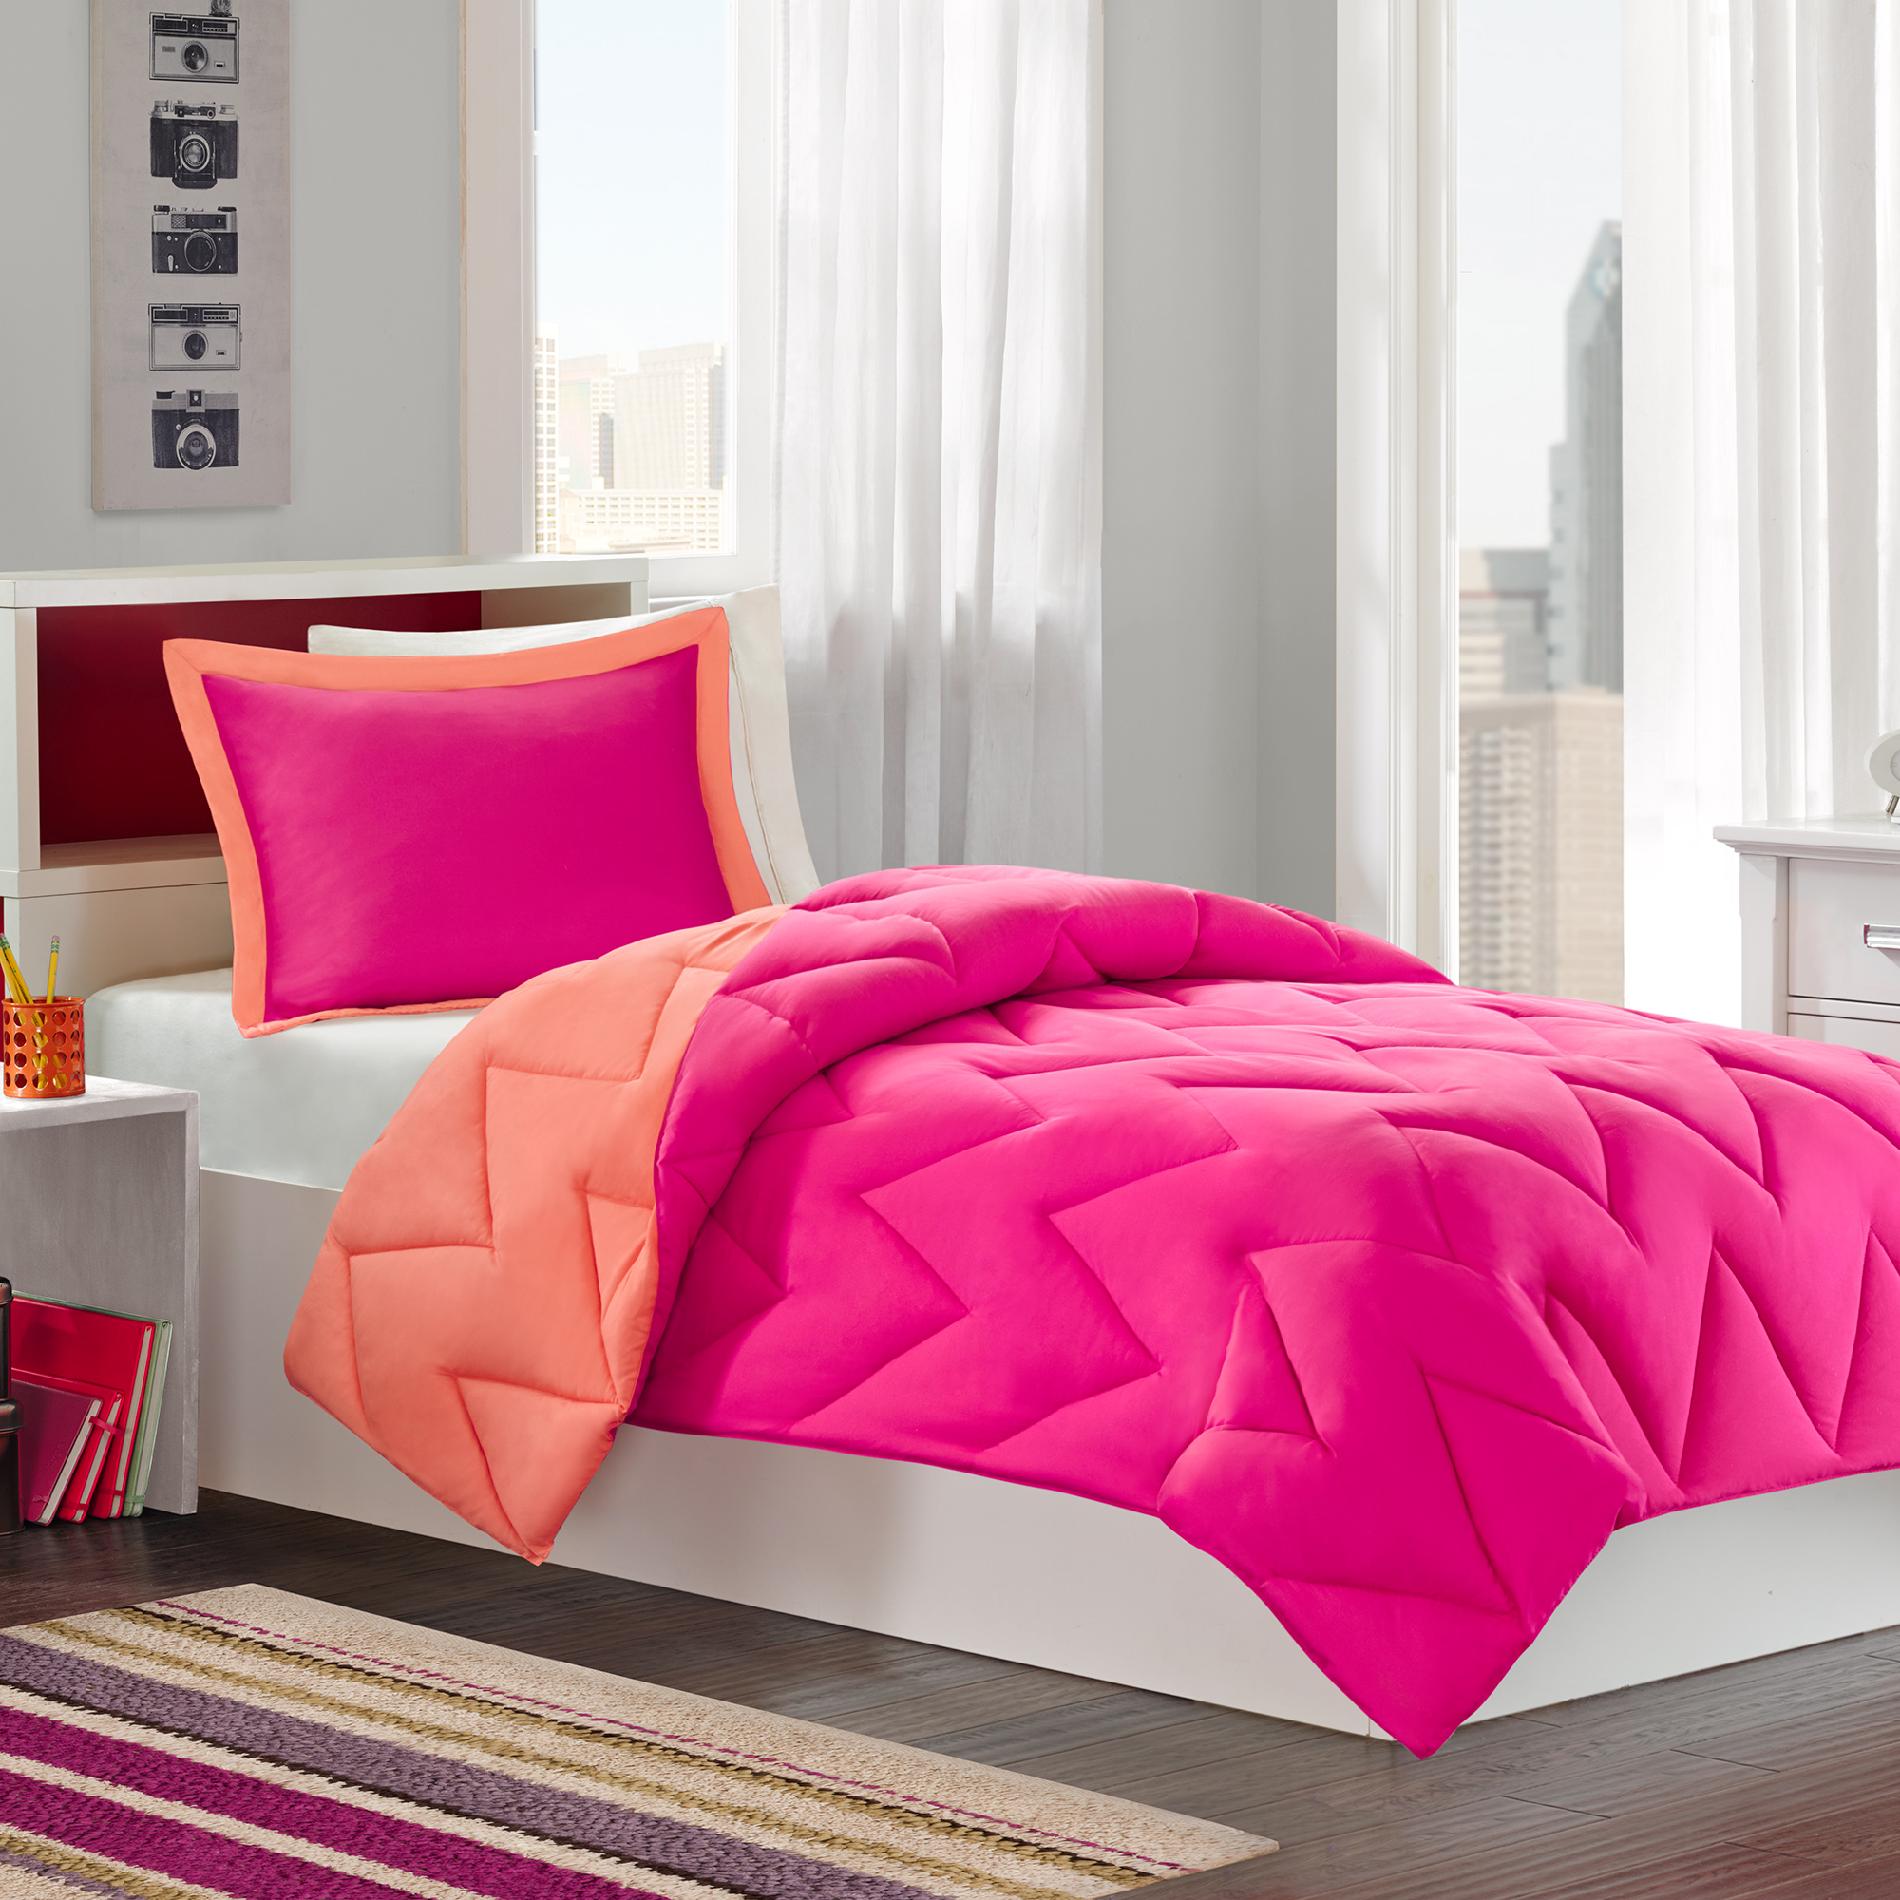 Colormate Raspberry/Coral Reversible Mini Bed Set - 3 Pieces